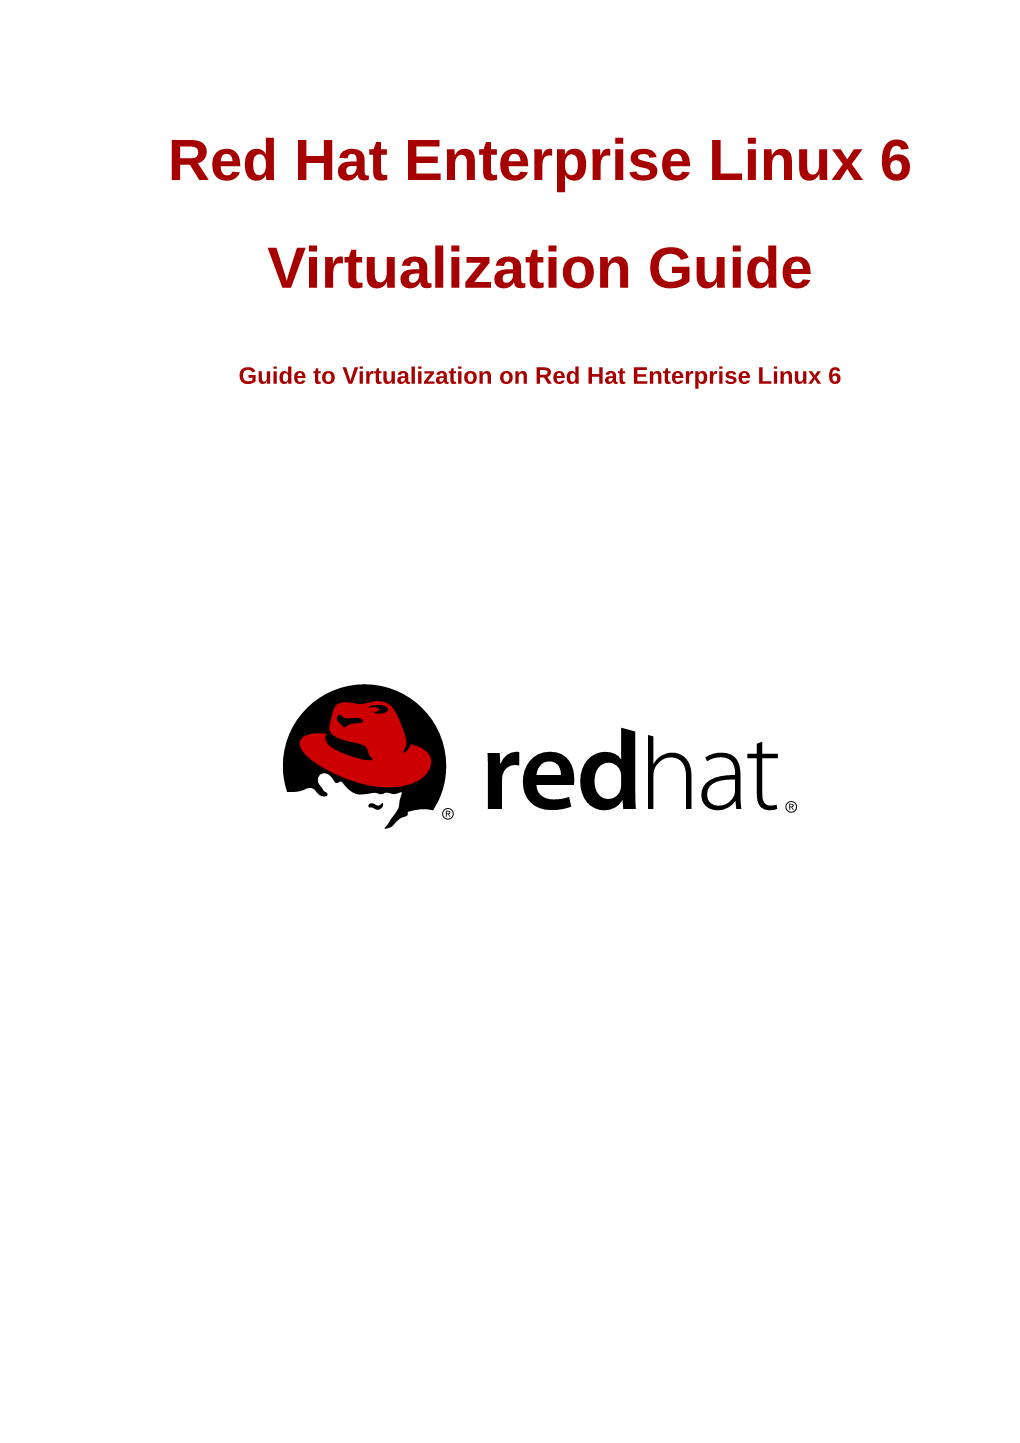 Guide to Virtualization on Red Hat Enterprise Linux 6 Virtualization Guide